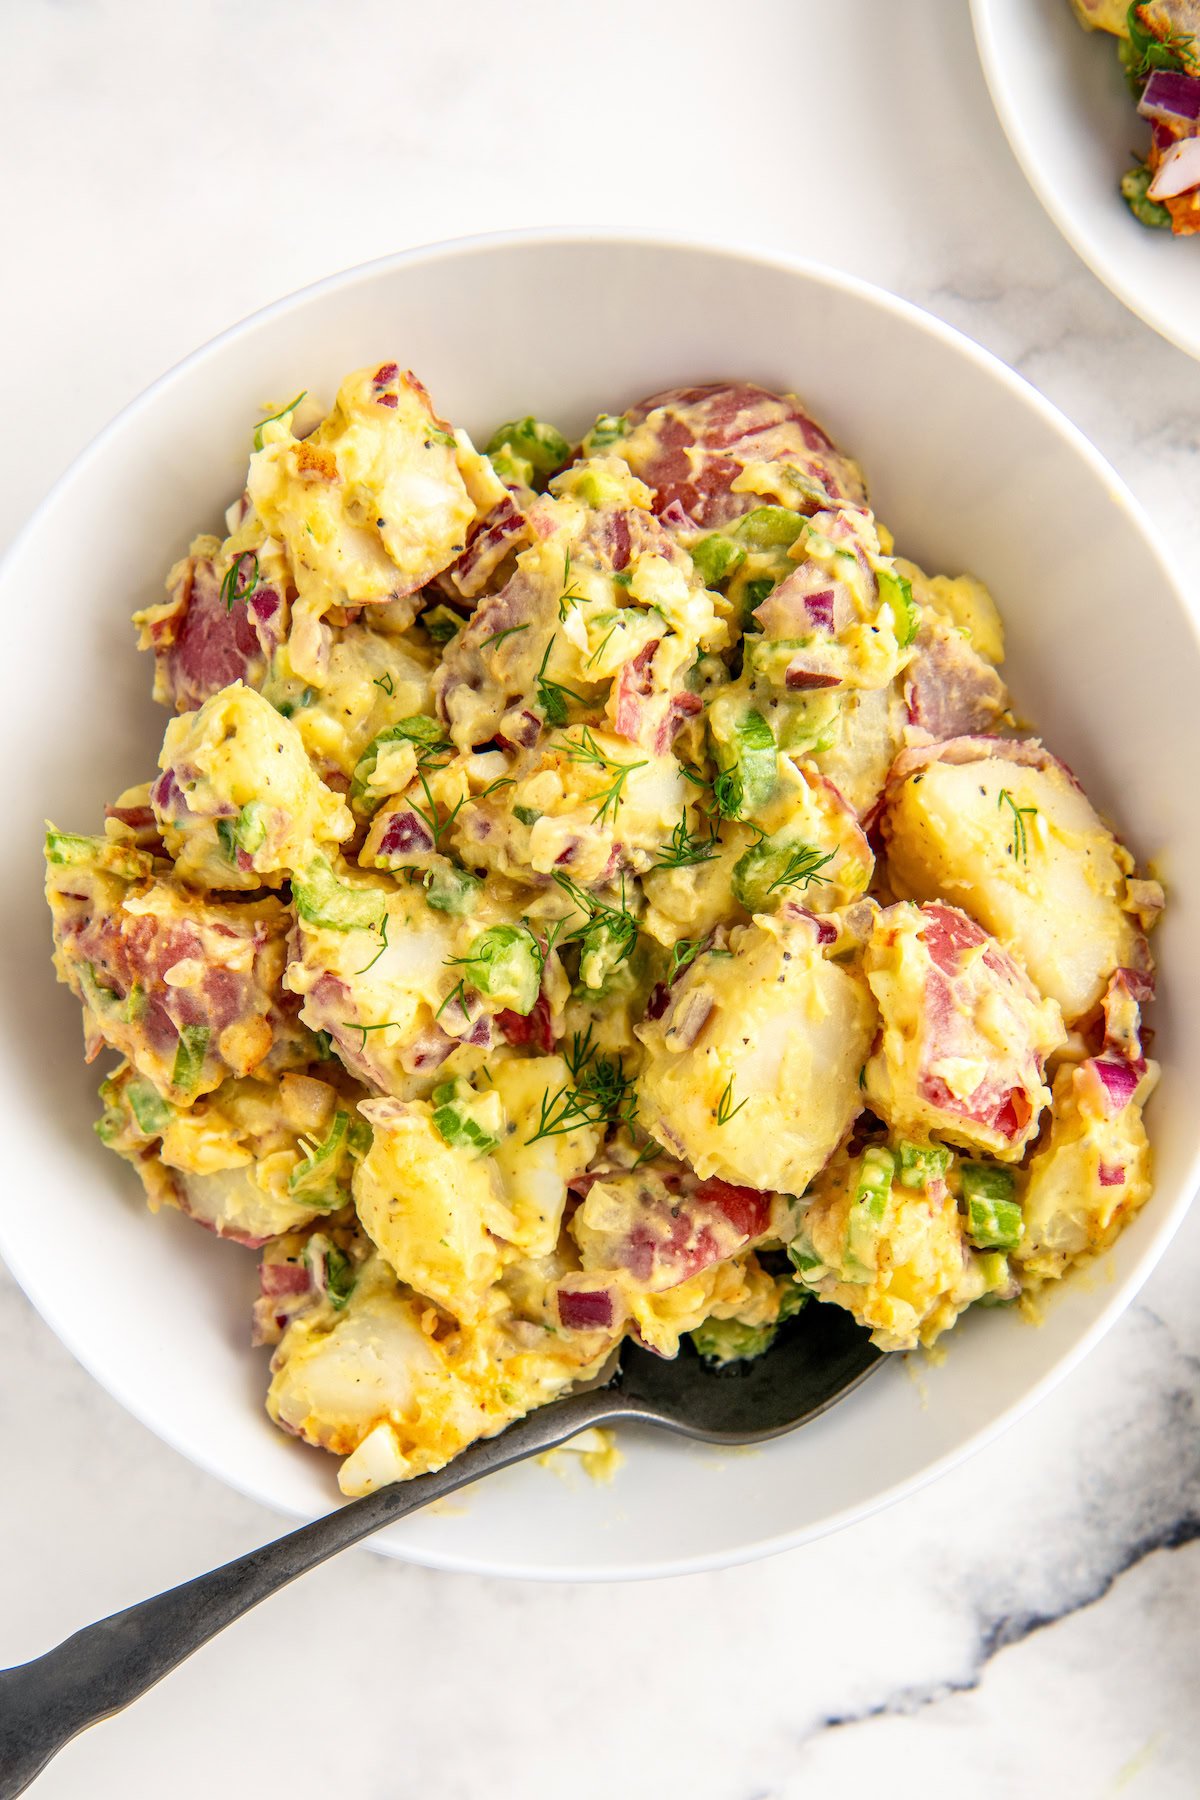 A large serving bowl of creamy red potato salad with egg, celery, onions, and creamy mayo-dill dressing. 